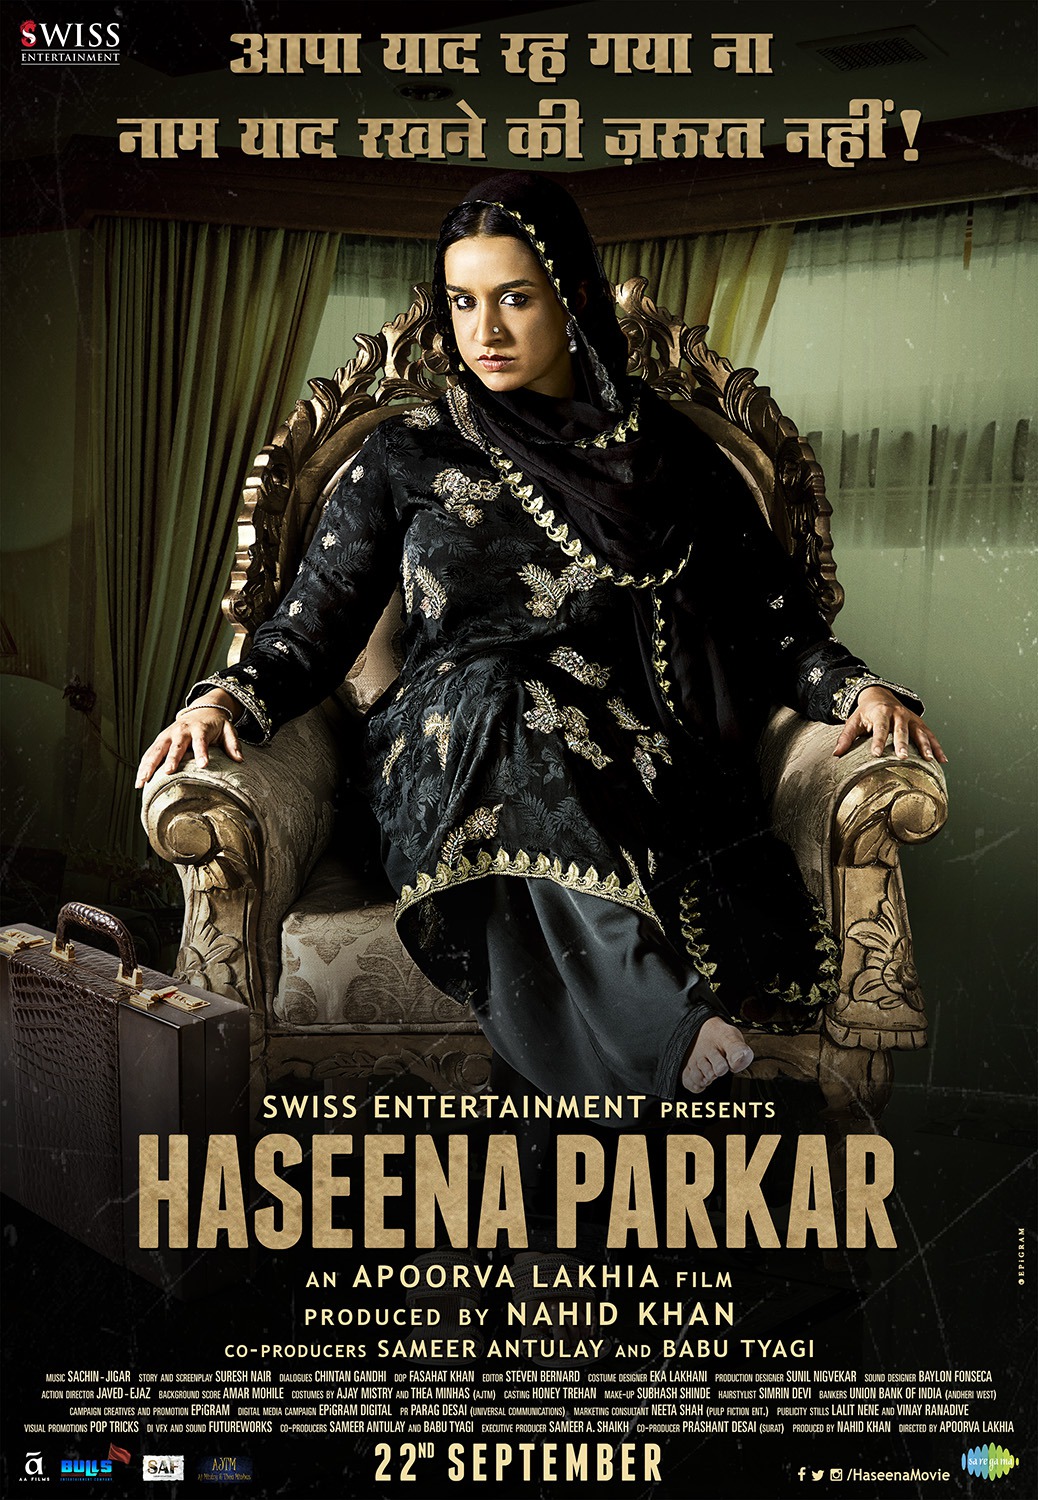 Extra Large Movie Poster Image for Haseena (#3 of 7)